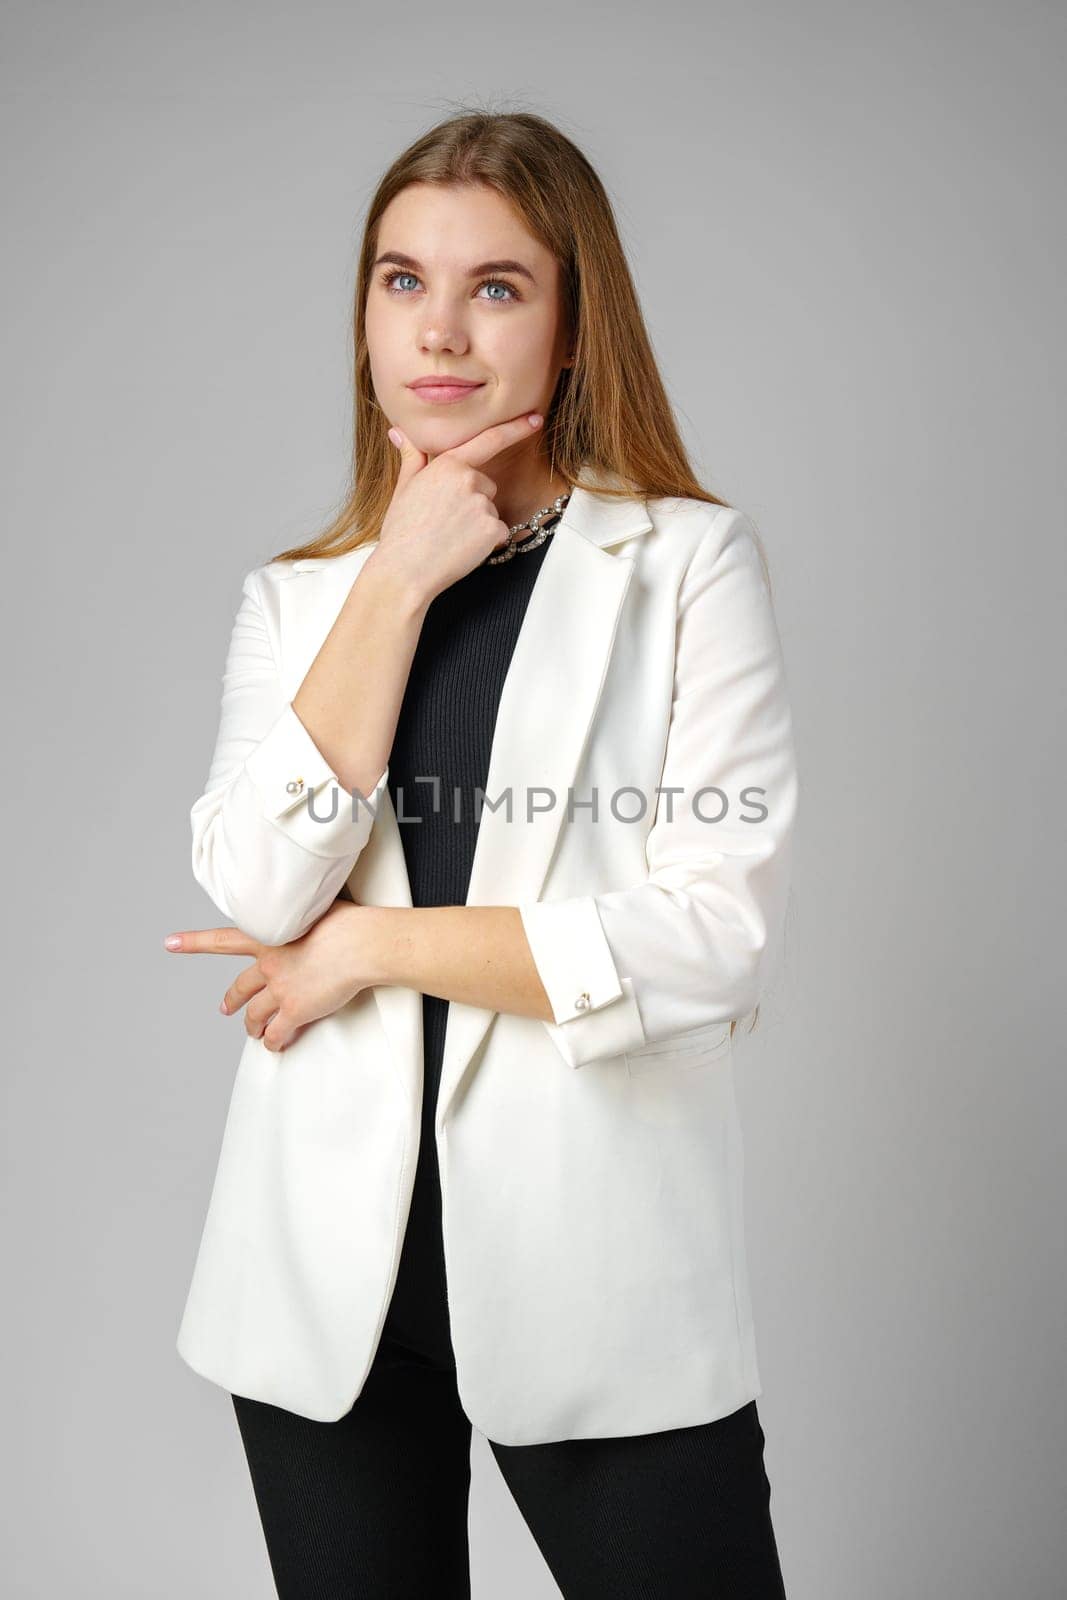 Thoughtful Young Woman in a Stylish White Blazer Posing on gray background by Fabrikasimf